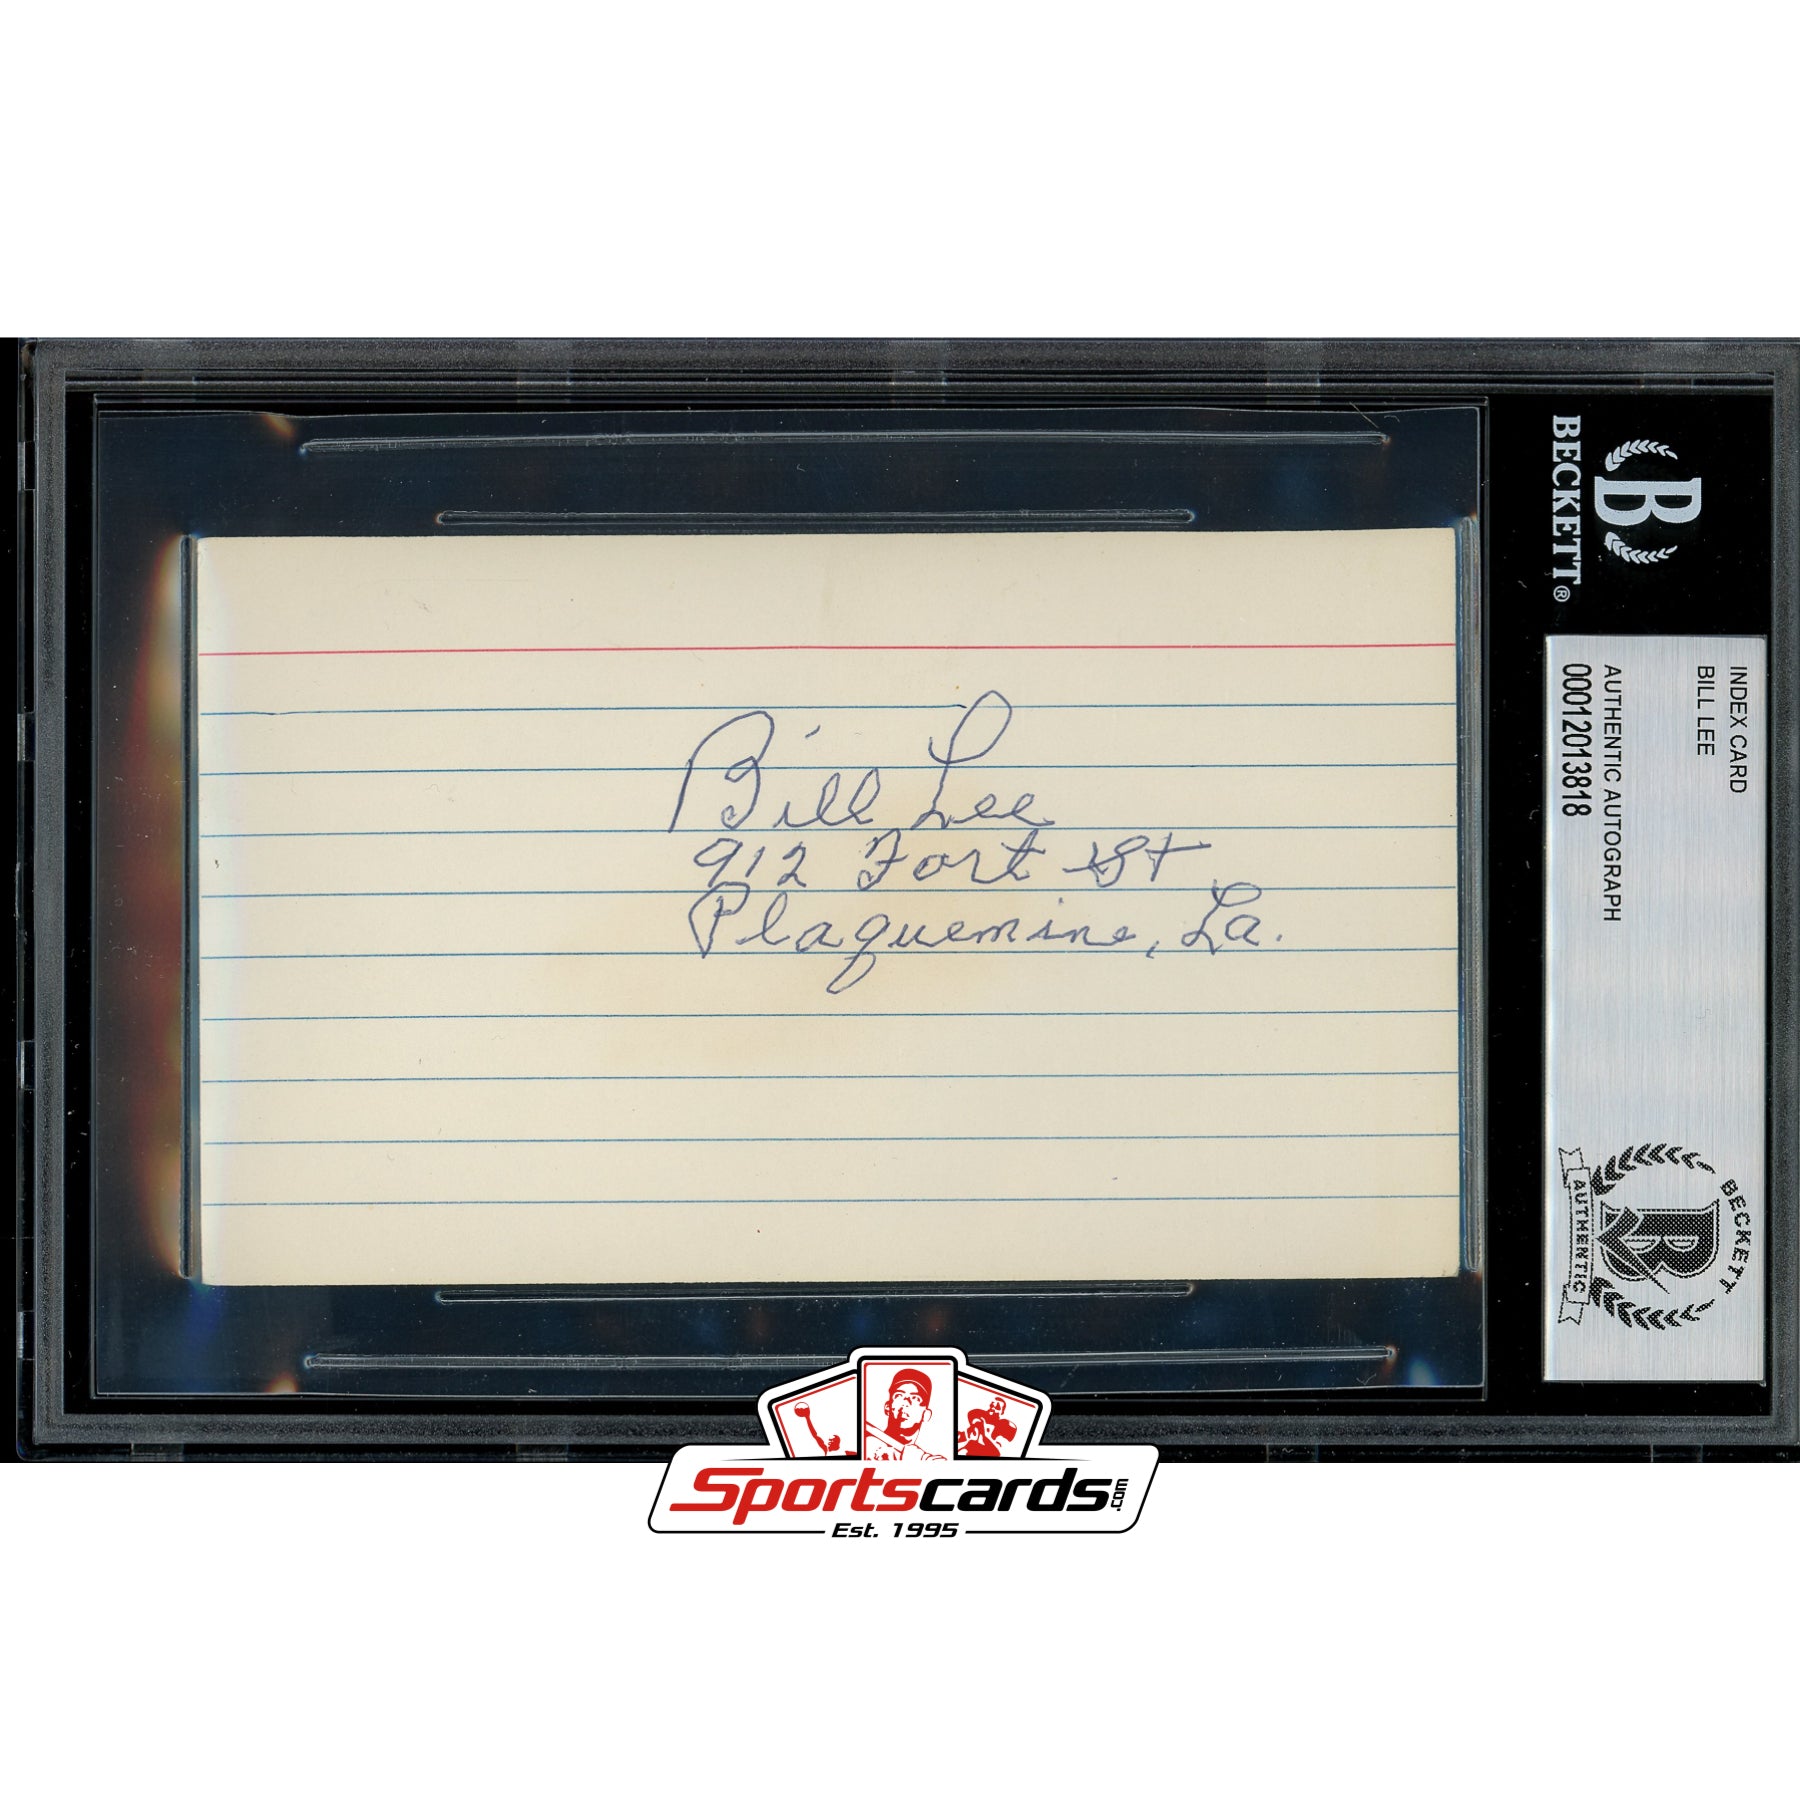 Bill Lee Signed Auto 3x5 Index Card Beckett Authentic